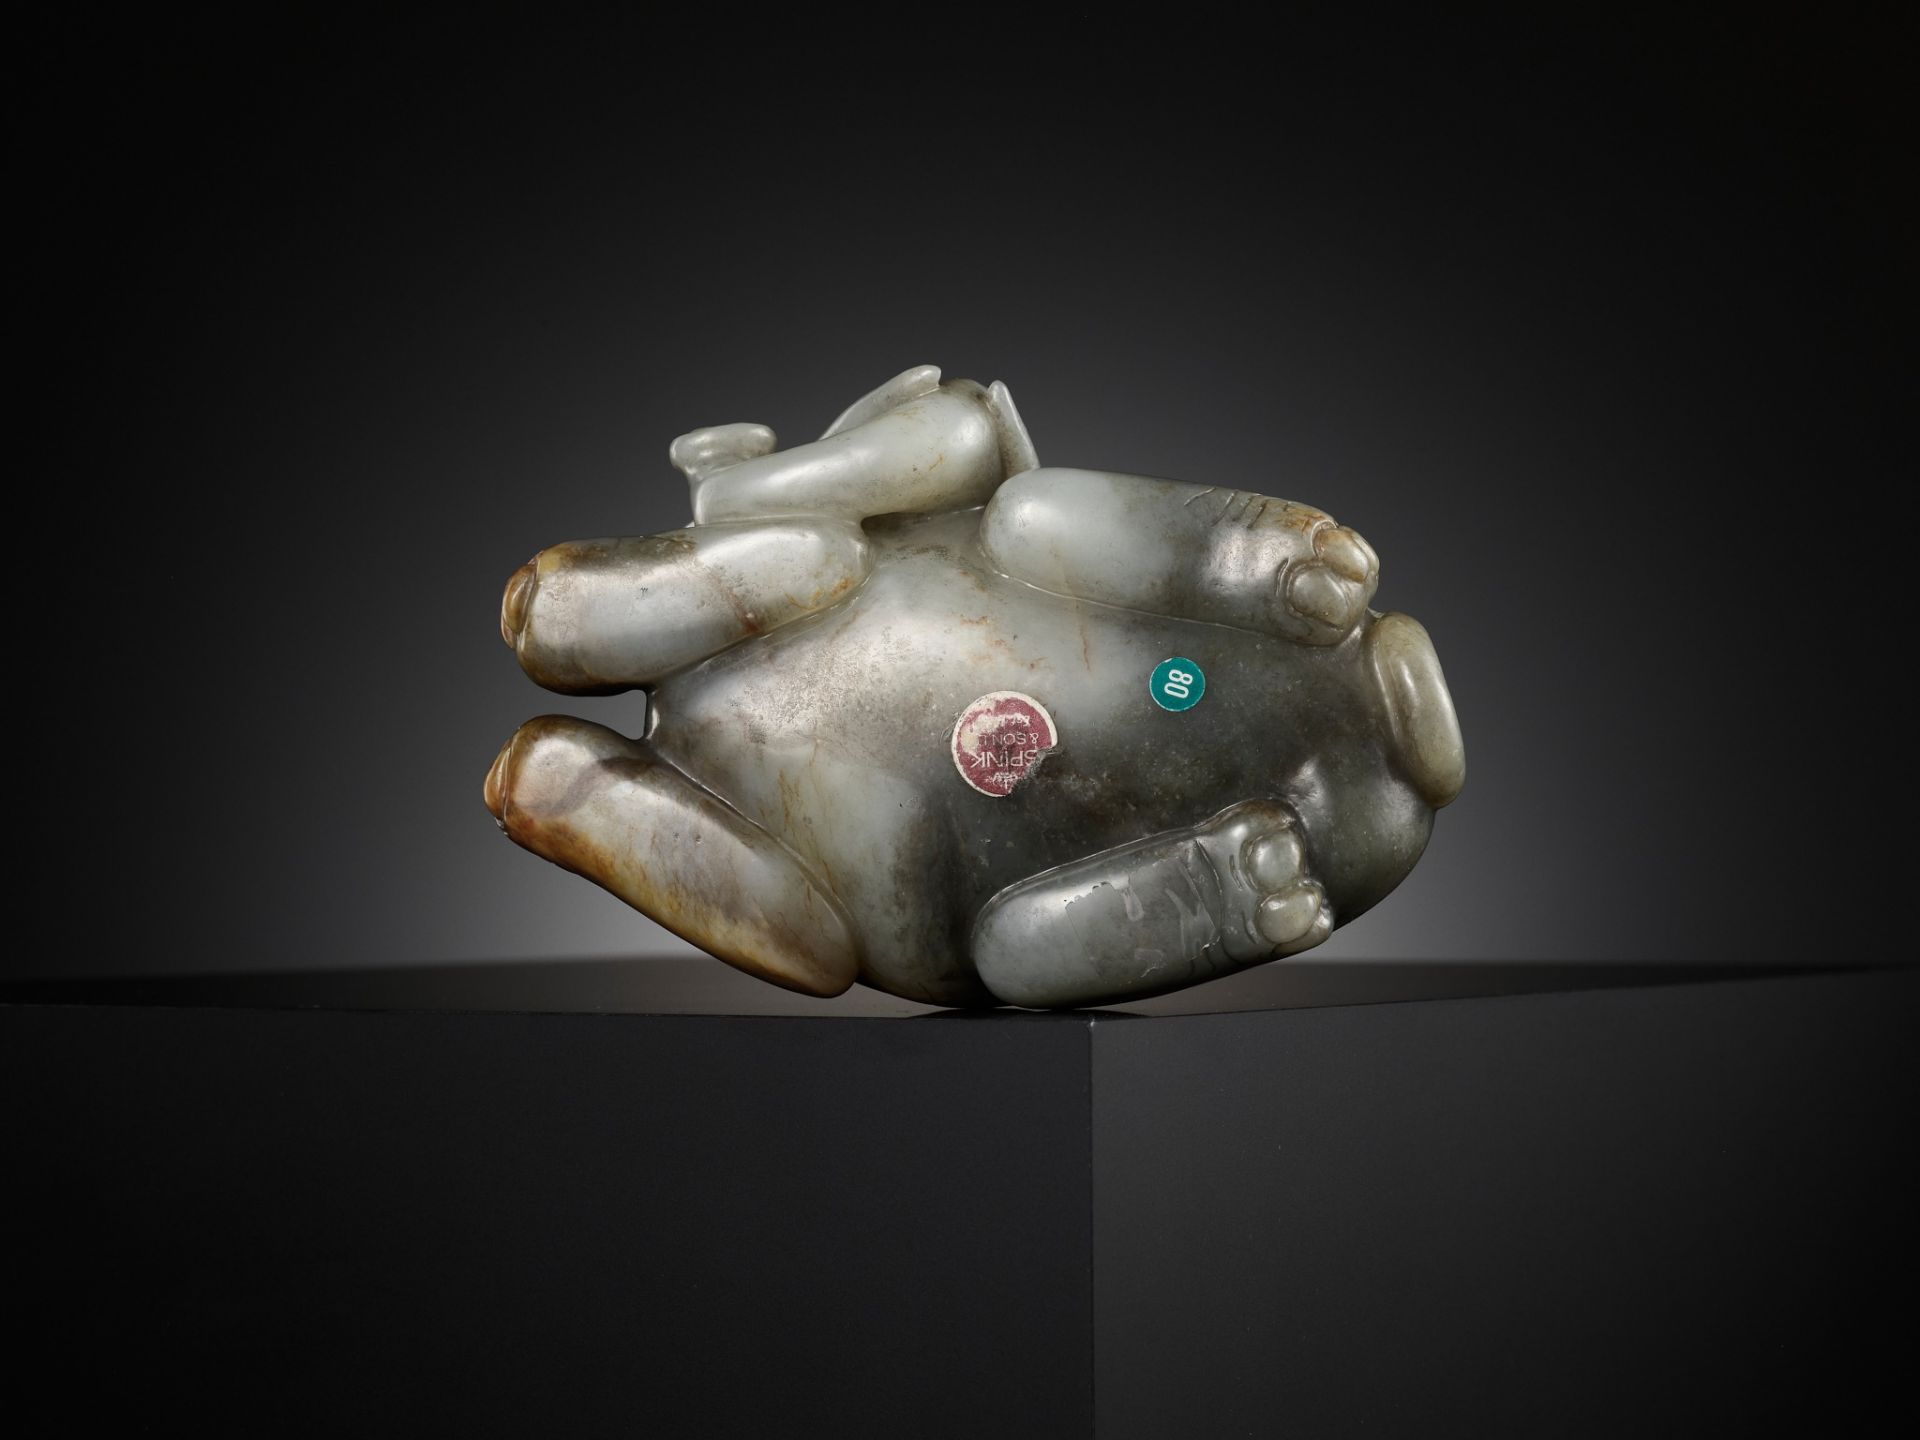 A GRAY AND RUSSET JADE FIGURE OF A RECUMBENT ELEPHANT, LATE MING TO MID-QING DYNASTY - Image 15 of 15